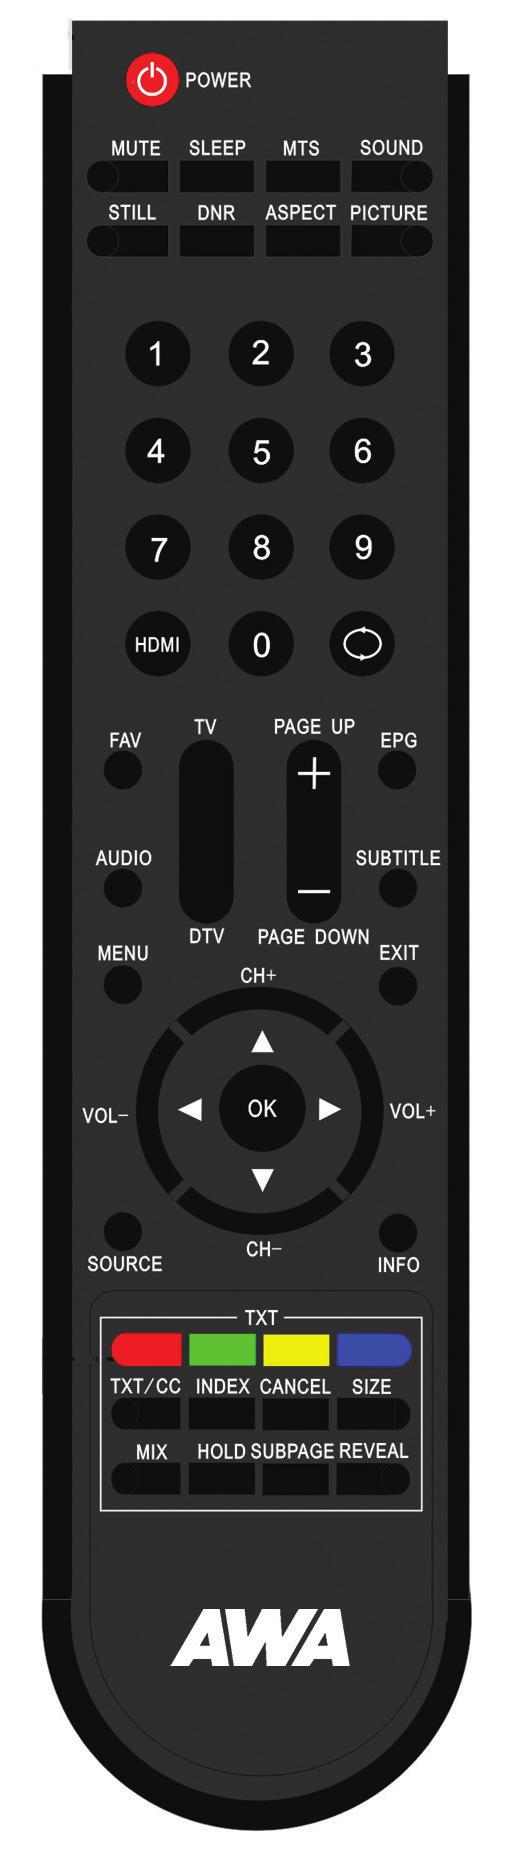 Remote Control Remote control functions 5 4 6 7 0 6 4 4 5 6 8 0 9 8 5 7 9 STANDBY Press this key to switch on the TV when at standby mode or enter standby mode.